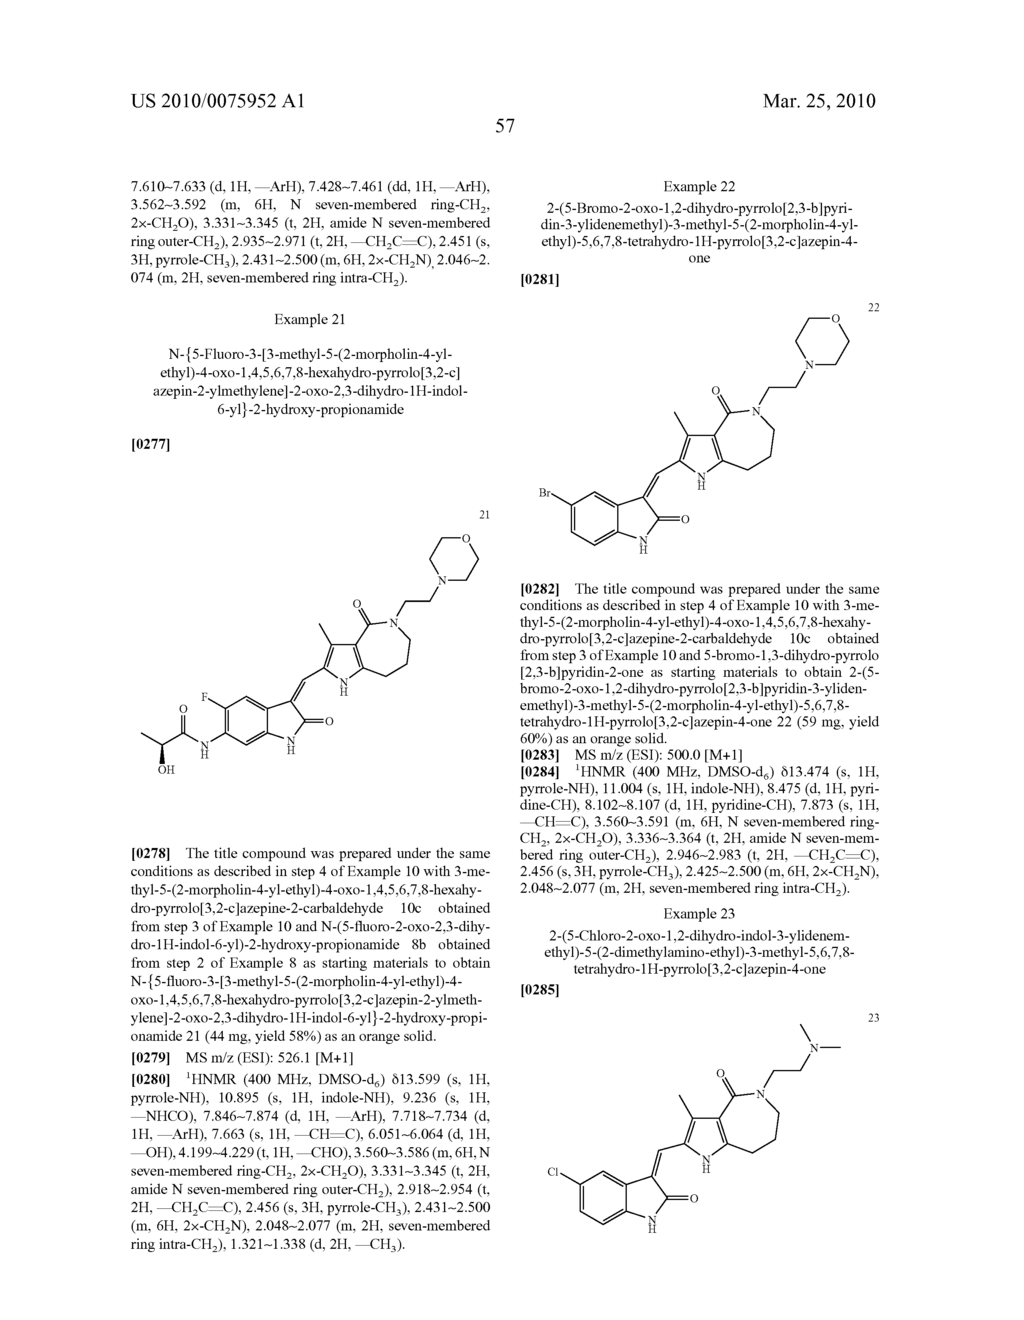 PYRROLO-NITROGENOUS HETEROCYCLIC DERIVATIES,THE PREPARATION AND THE PHARMCETICAL USE THEEOF - diagram, schematic, and image 58